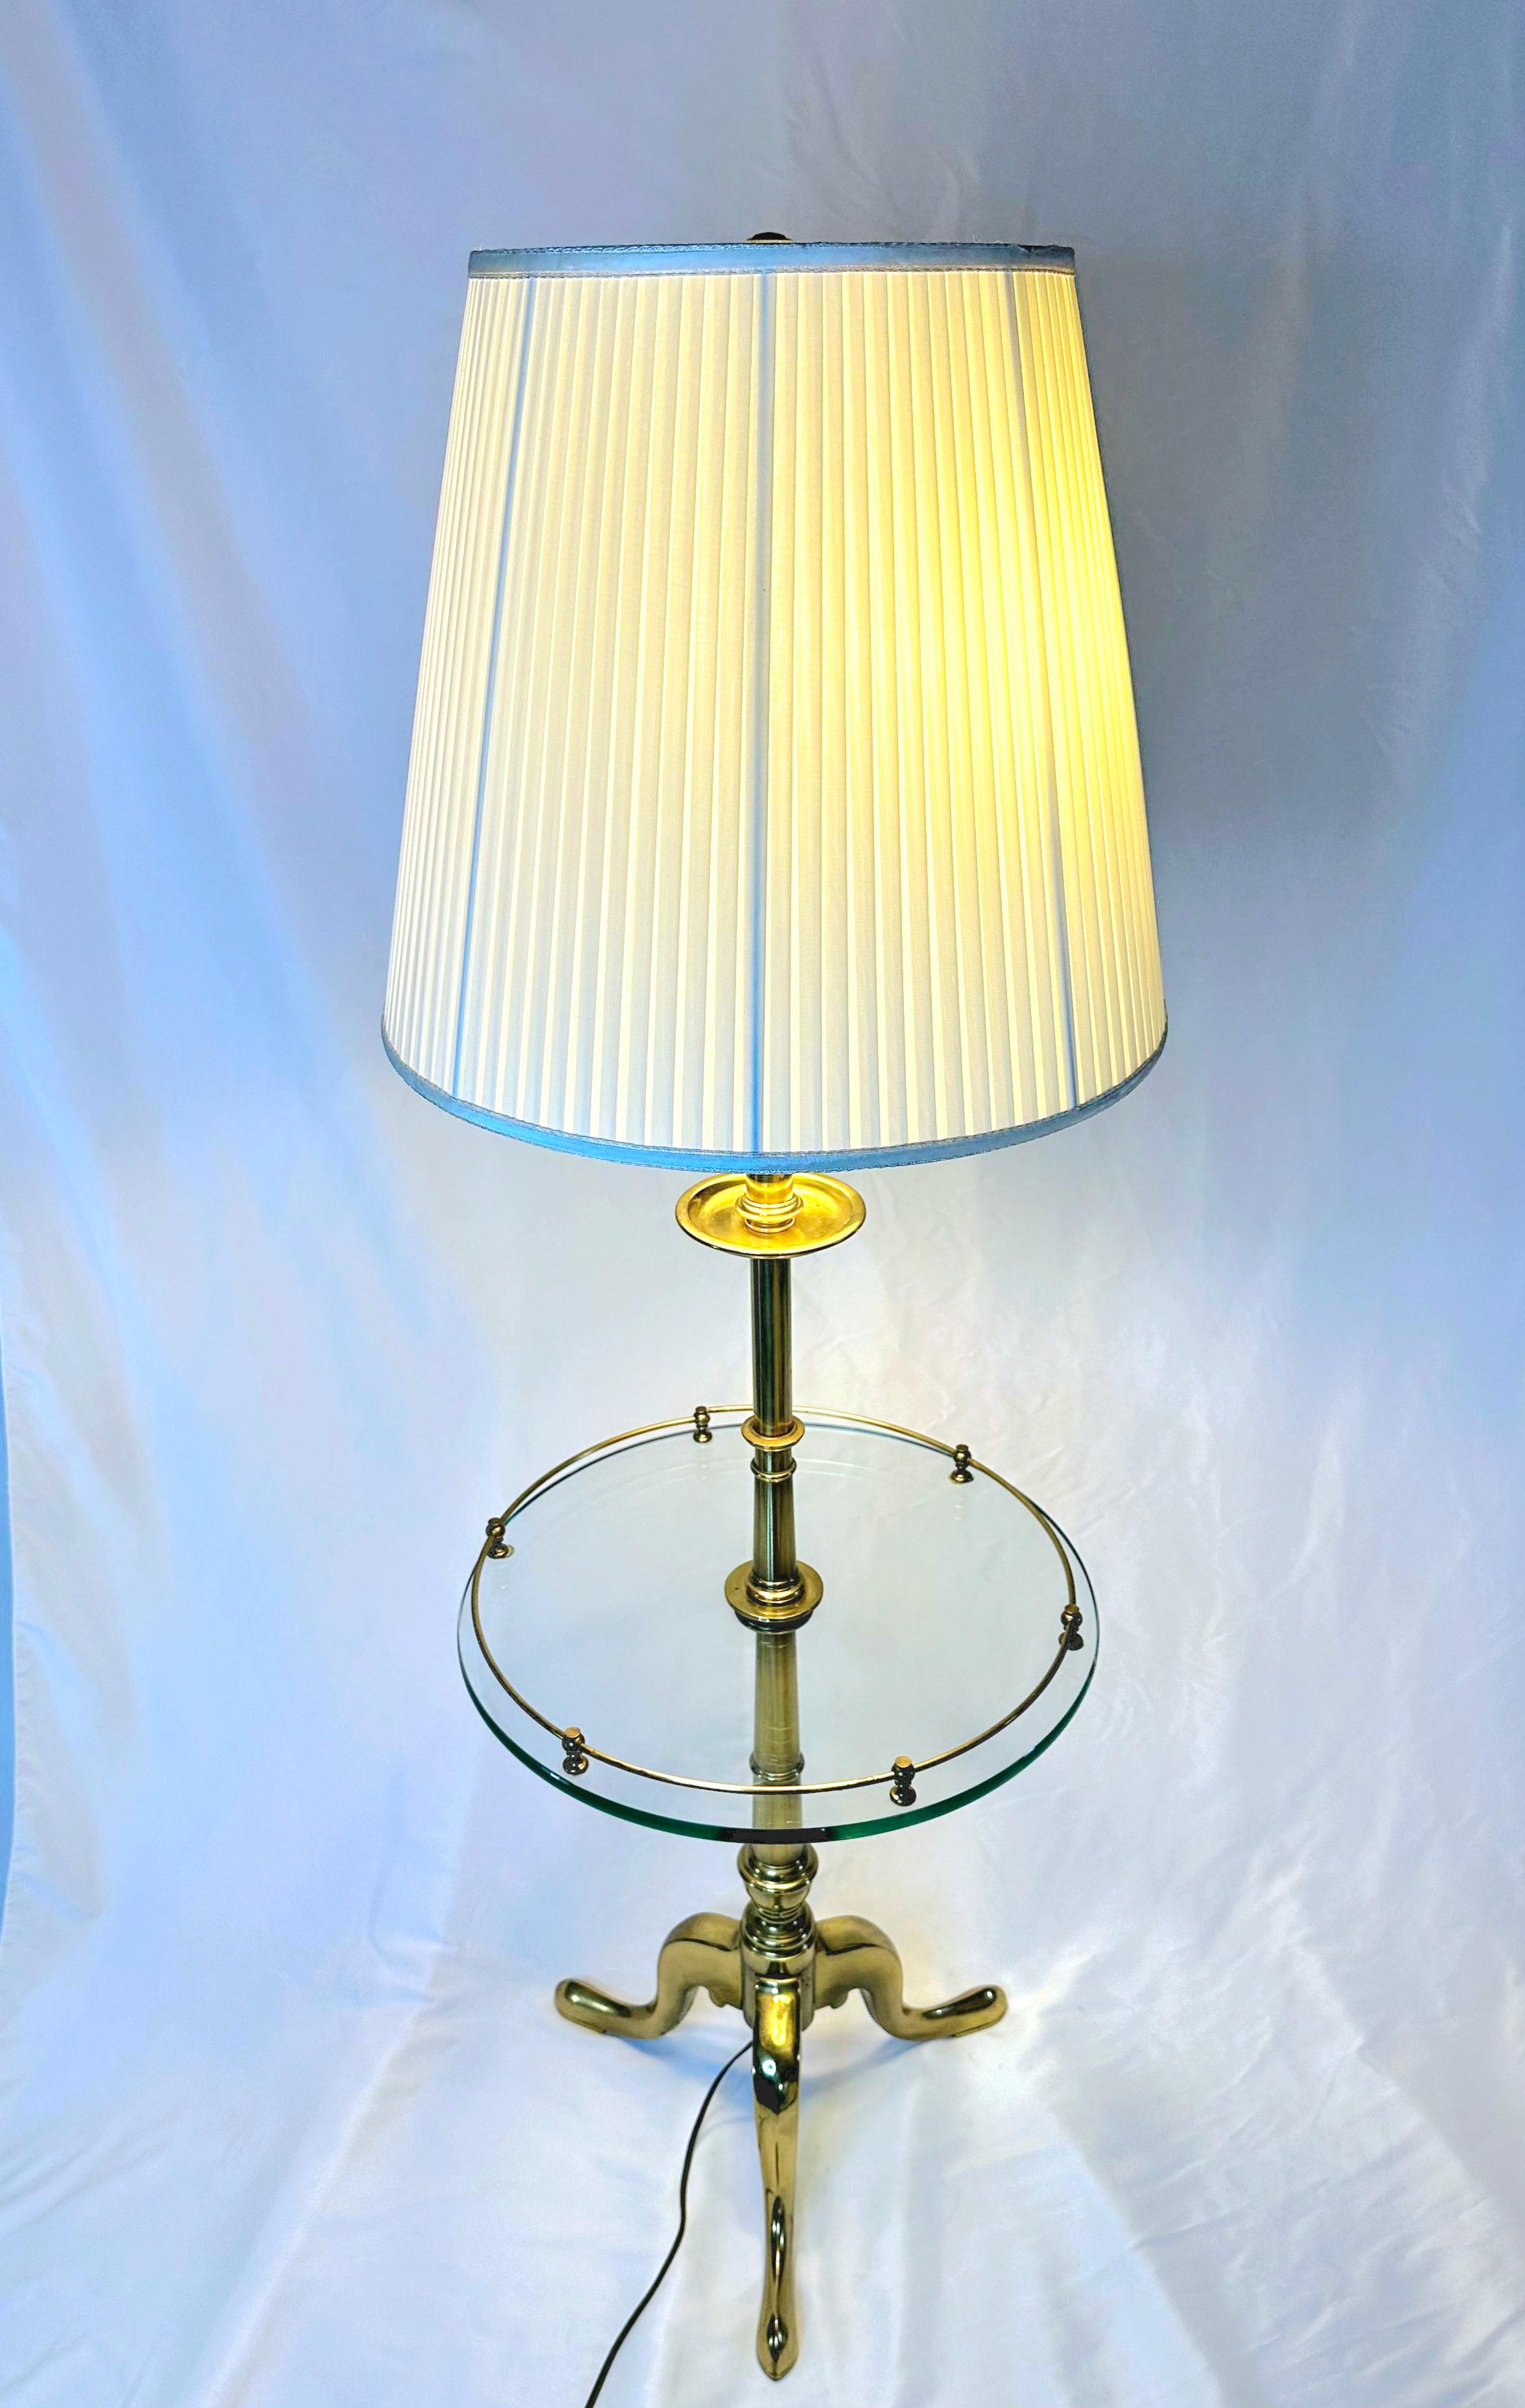 French Provincial Stiffel Floor Lamp With Glass Table and tripod legs For Sale 23